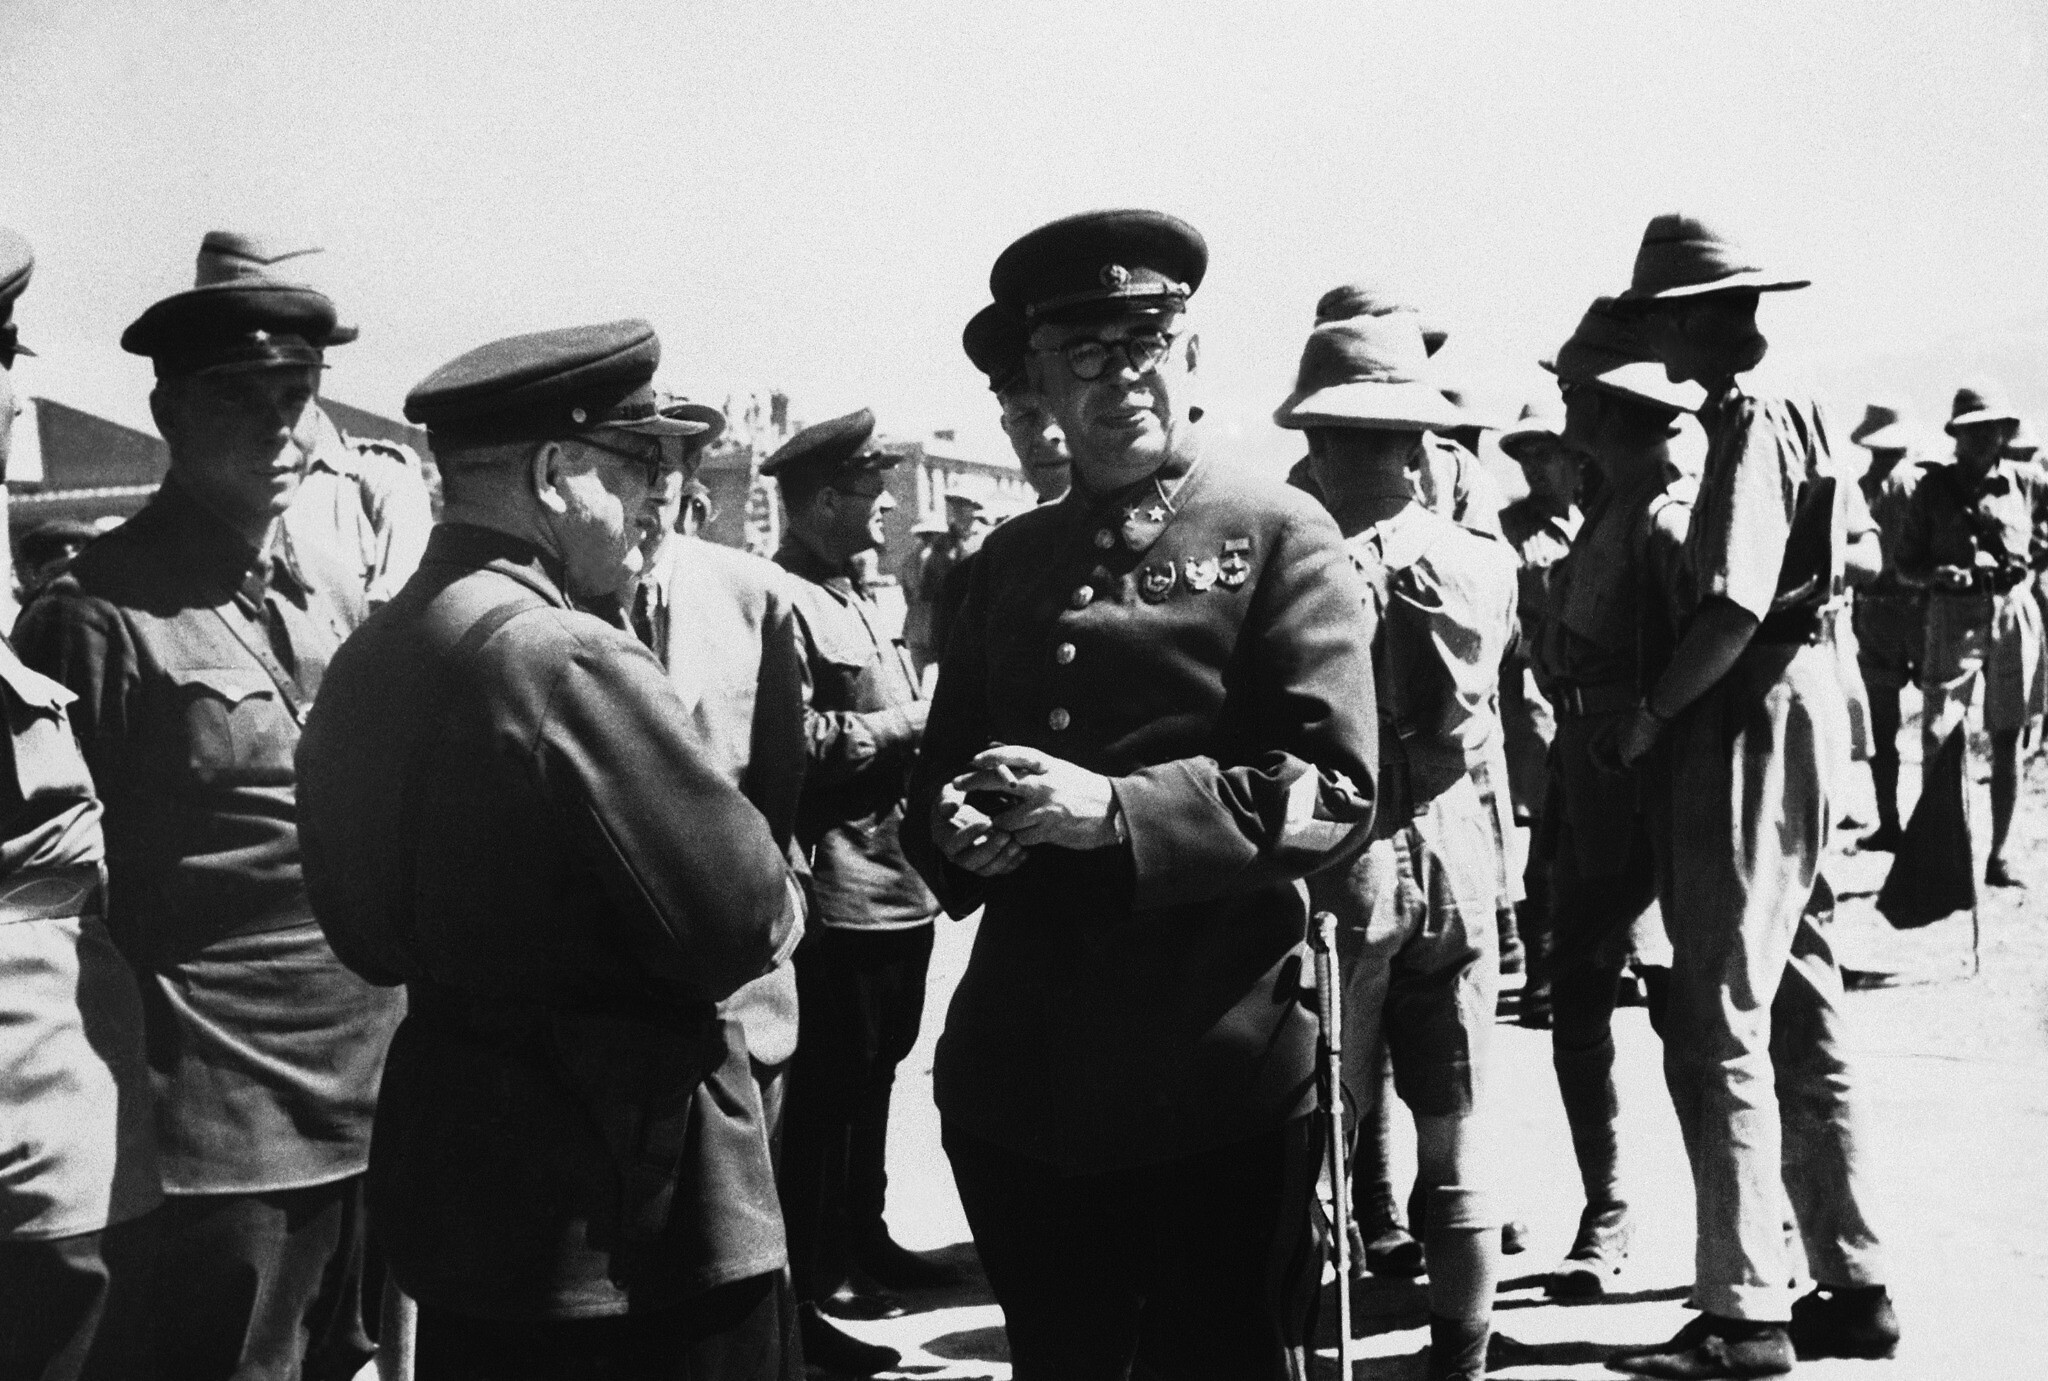 Major General Vassili Vassilovich Novikov, commanding Russian forces in North Iran, center, facing camera, watching a review of his and British troops in Tehran, Iran on November 5, 1941. (AP Photo)